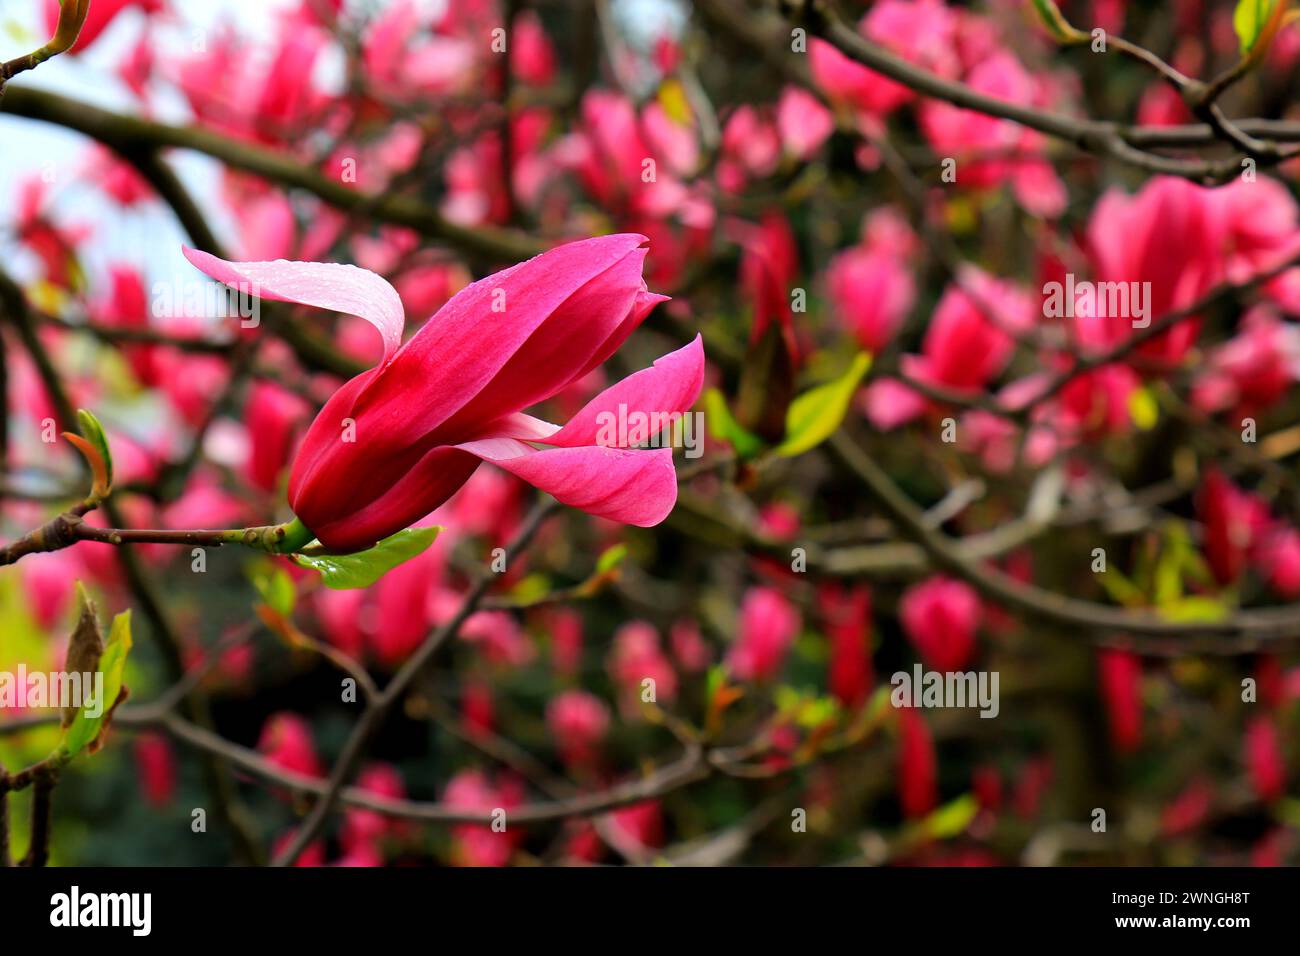 Beautiful magnolia tree blossoms in springtime. Jentle Chinese red magnolia flower. Romantic floral background. Stock Photo